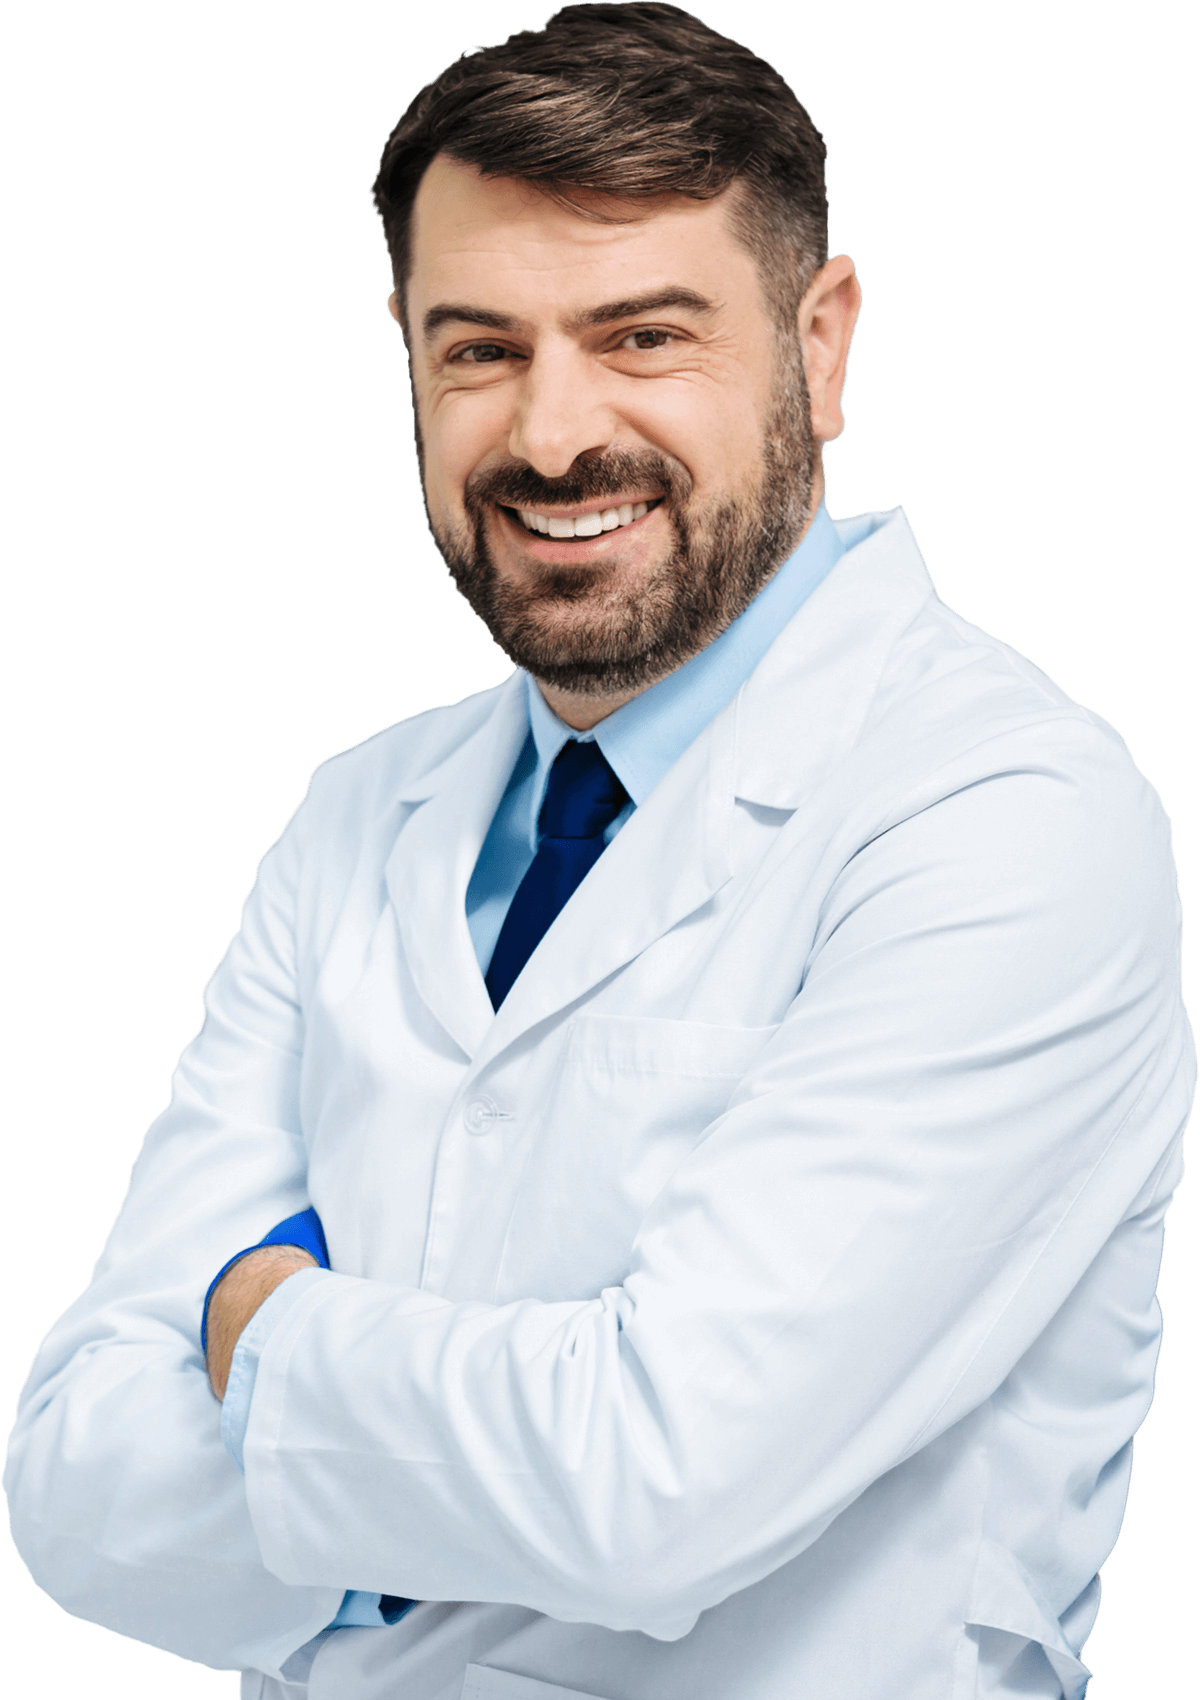 https://www.m-clinic.pl/wp-content/uploads/2020/02/doctor-2-1.png